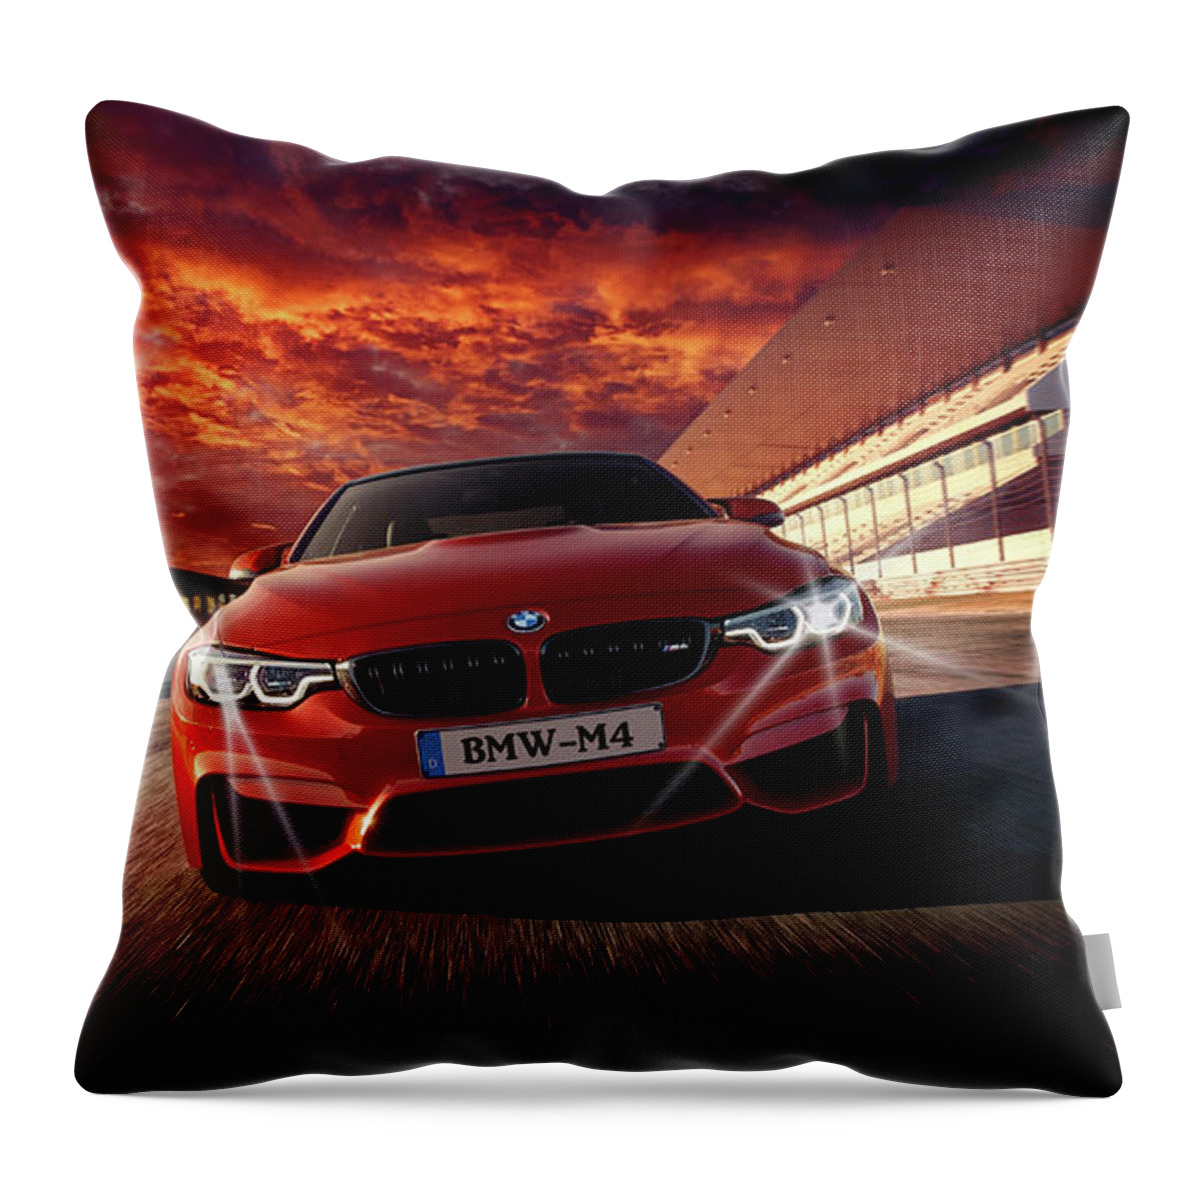 Bmw Throw Pillow featuring the photograph B M W M 4 by Movie Poster Prints